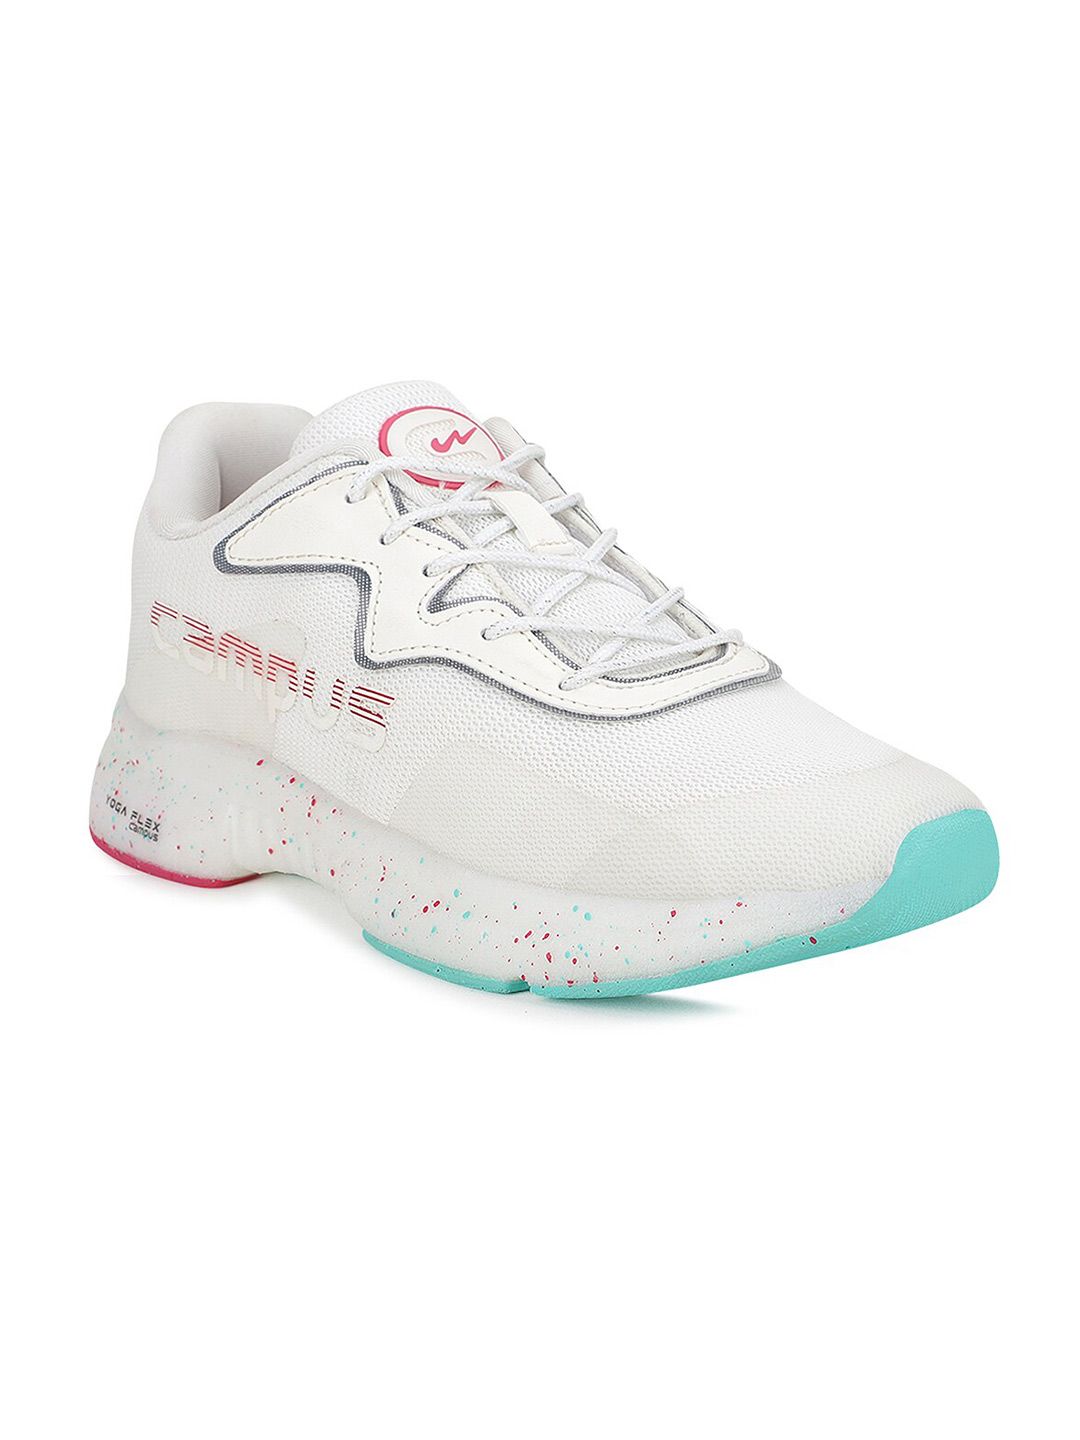 Campus Women Off White Mesh Running Shoes Price in India